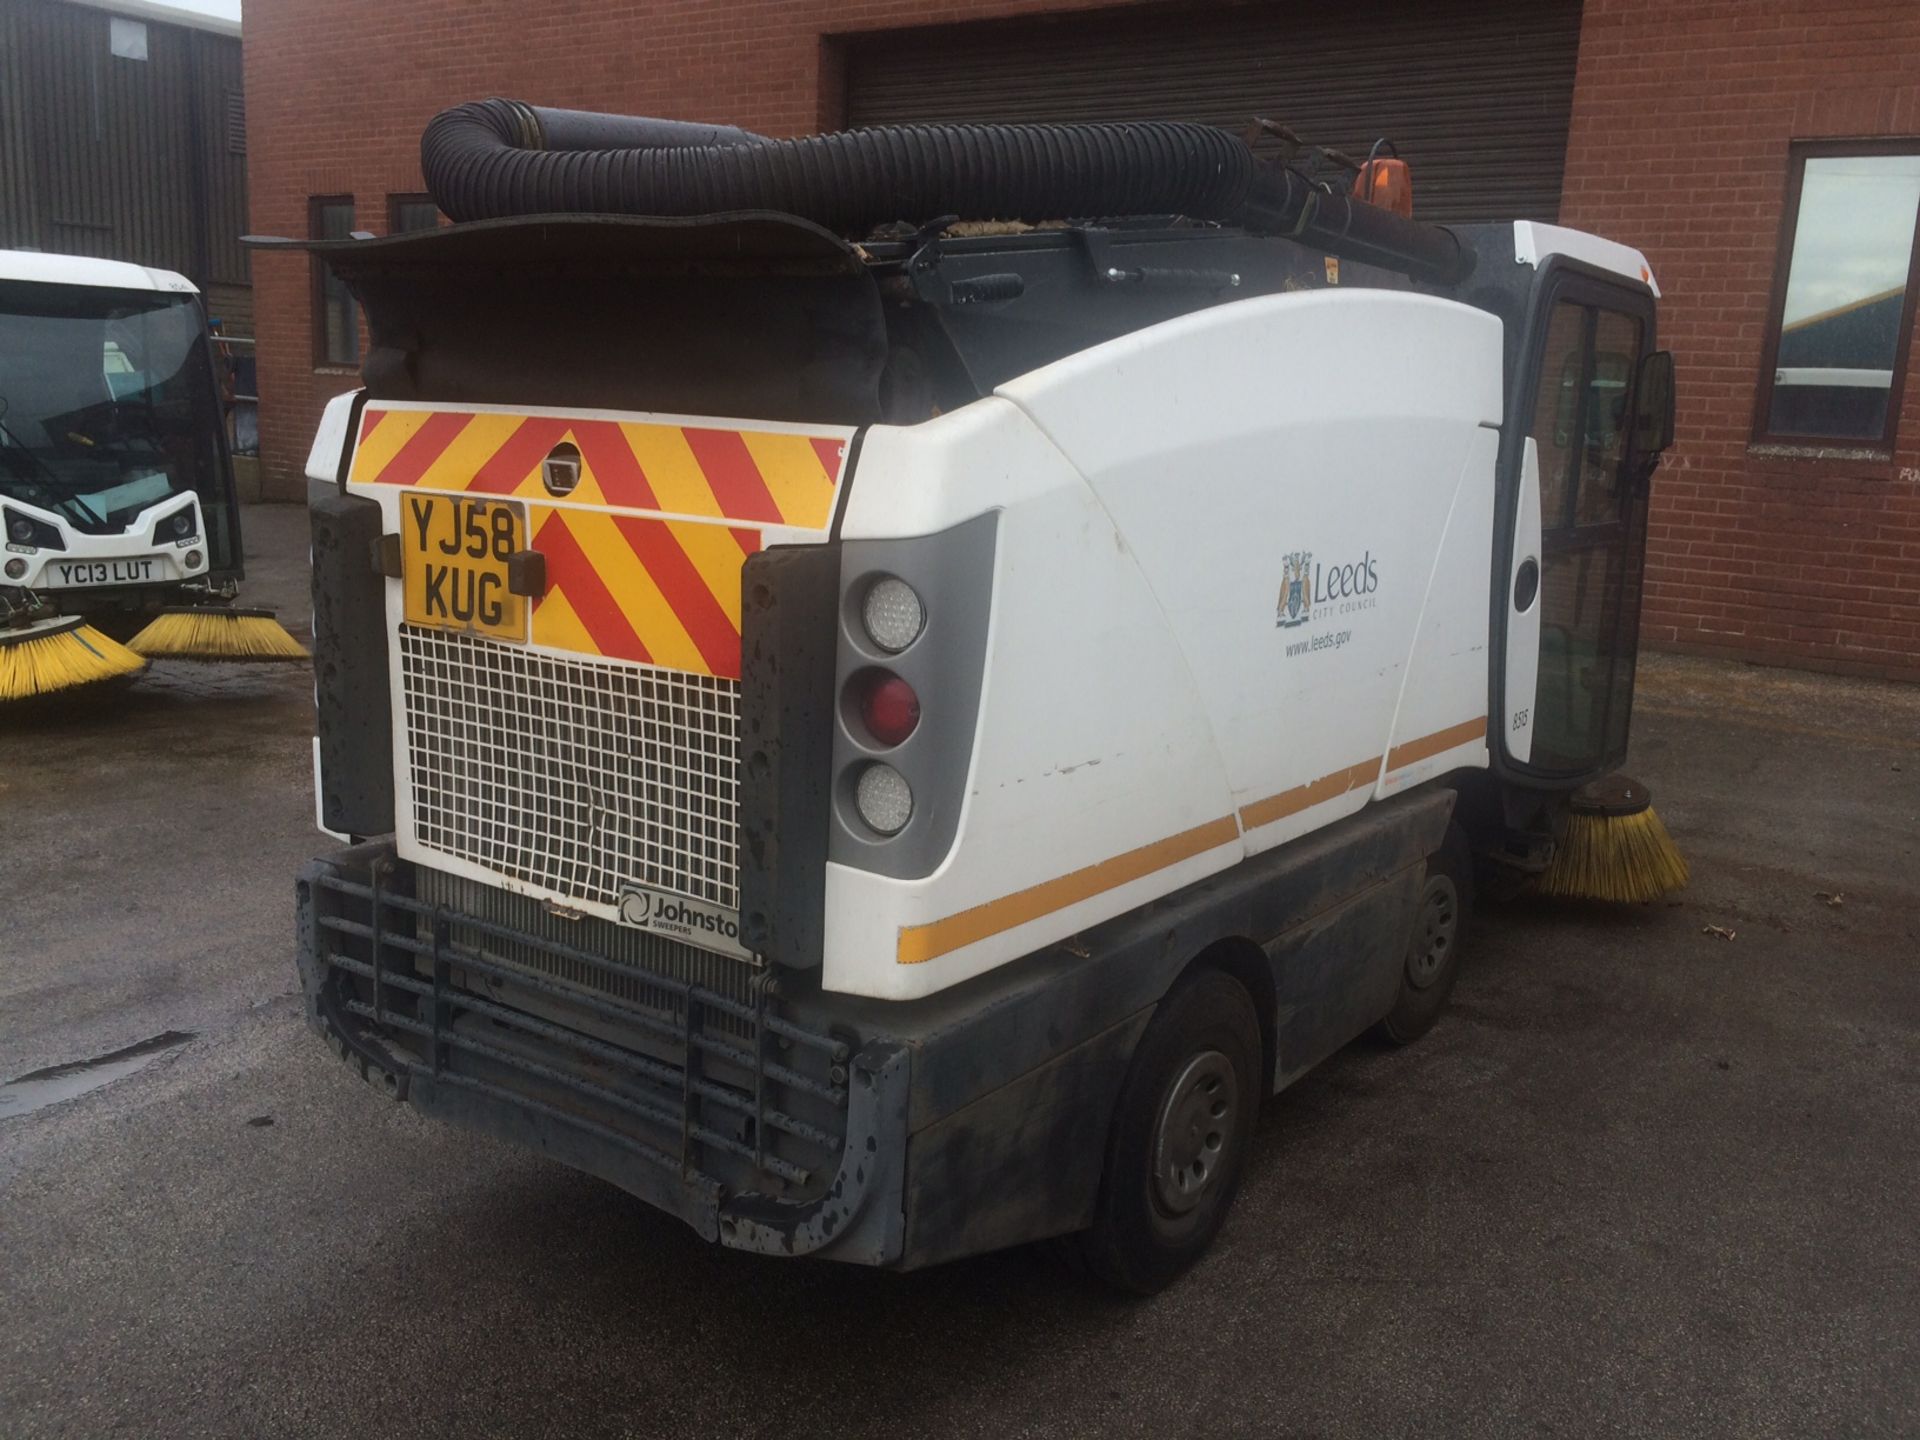 JOHNSTON COMPACT ROAD SWEEPER - Model CX 200 - Date in Service: Sept 2008 - Reg YJ58 KUG - Hours: 78 - Image 2 of 3